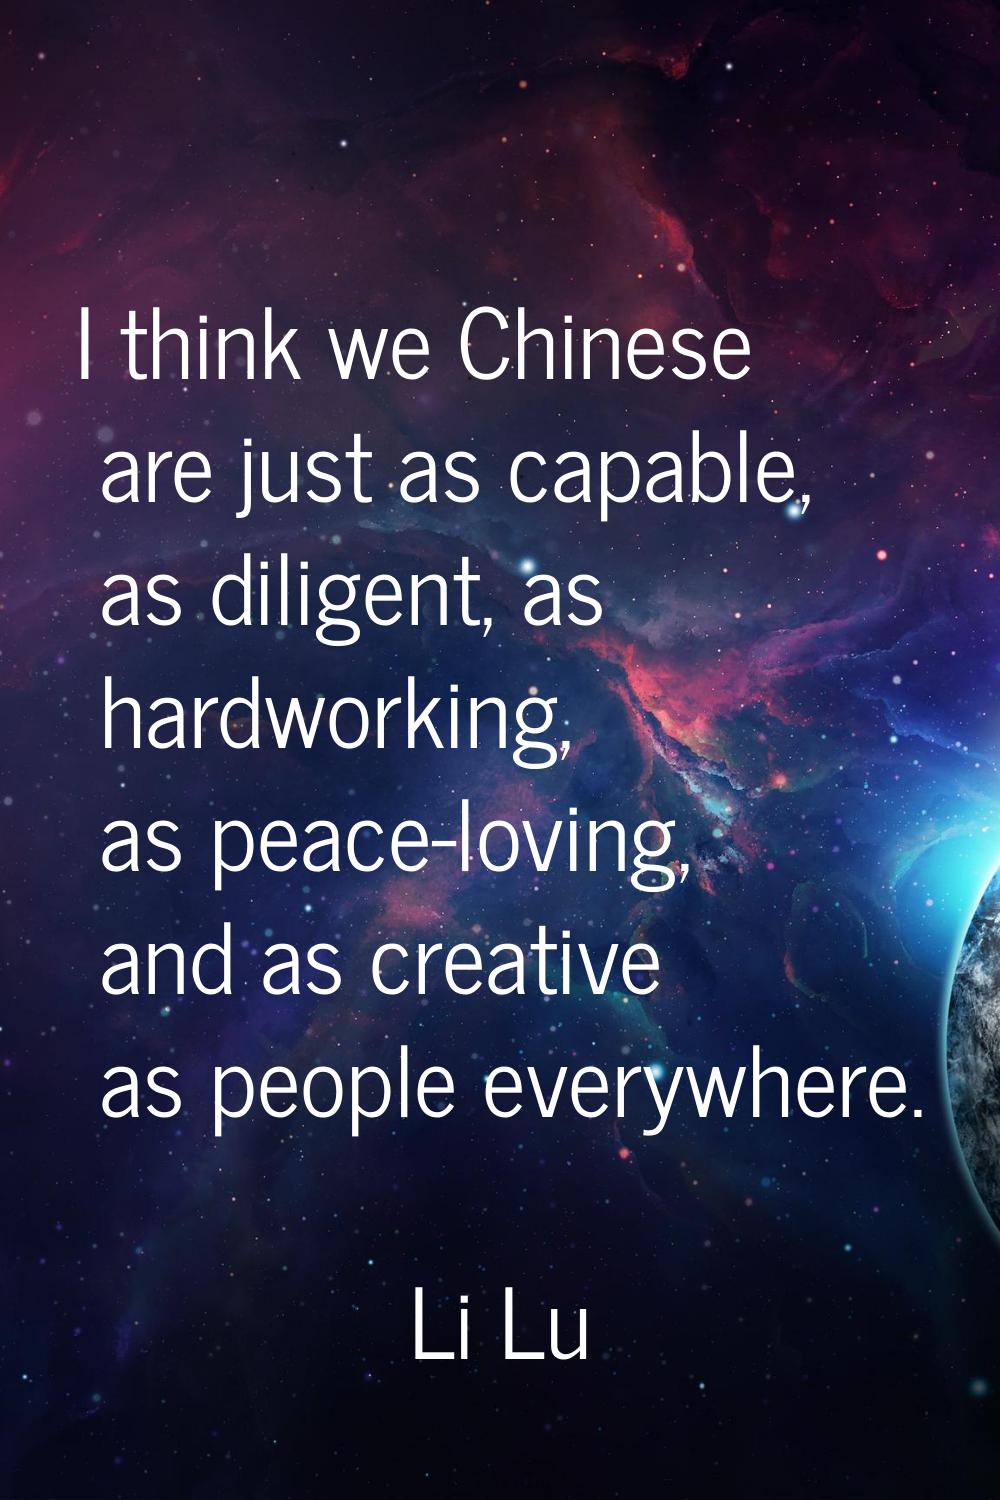 I think we Chinese are just as capable, as diligent, as hardworking, as peace-loving, and as creati